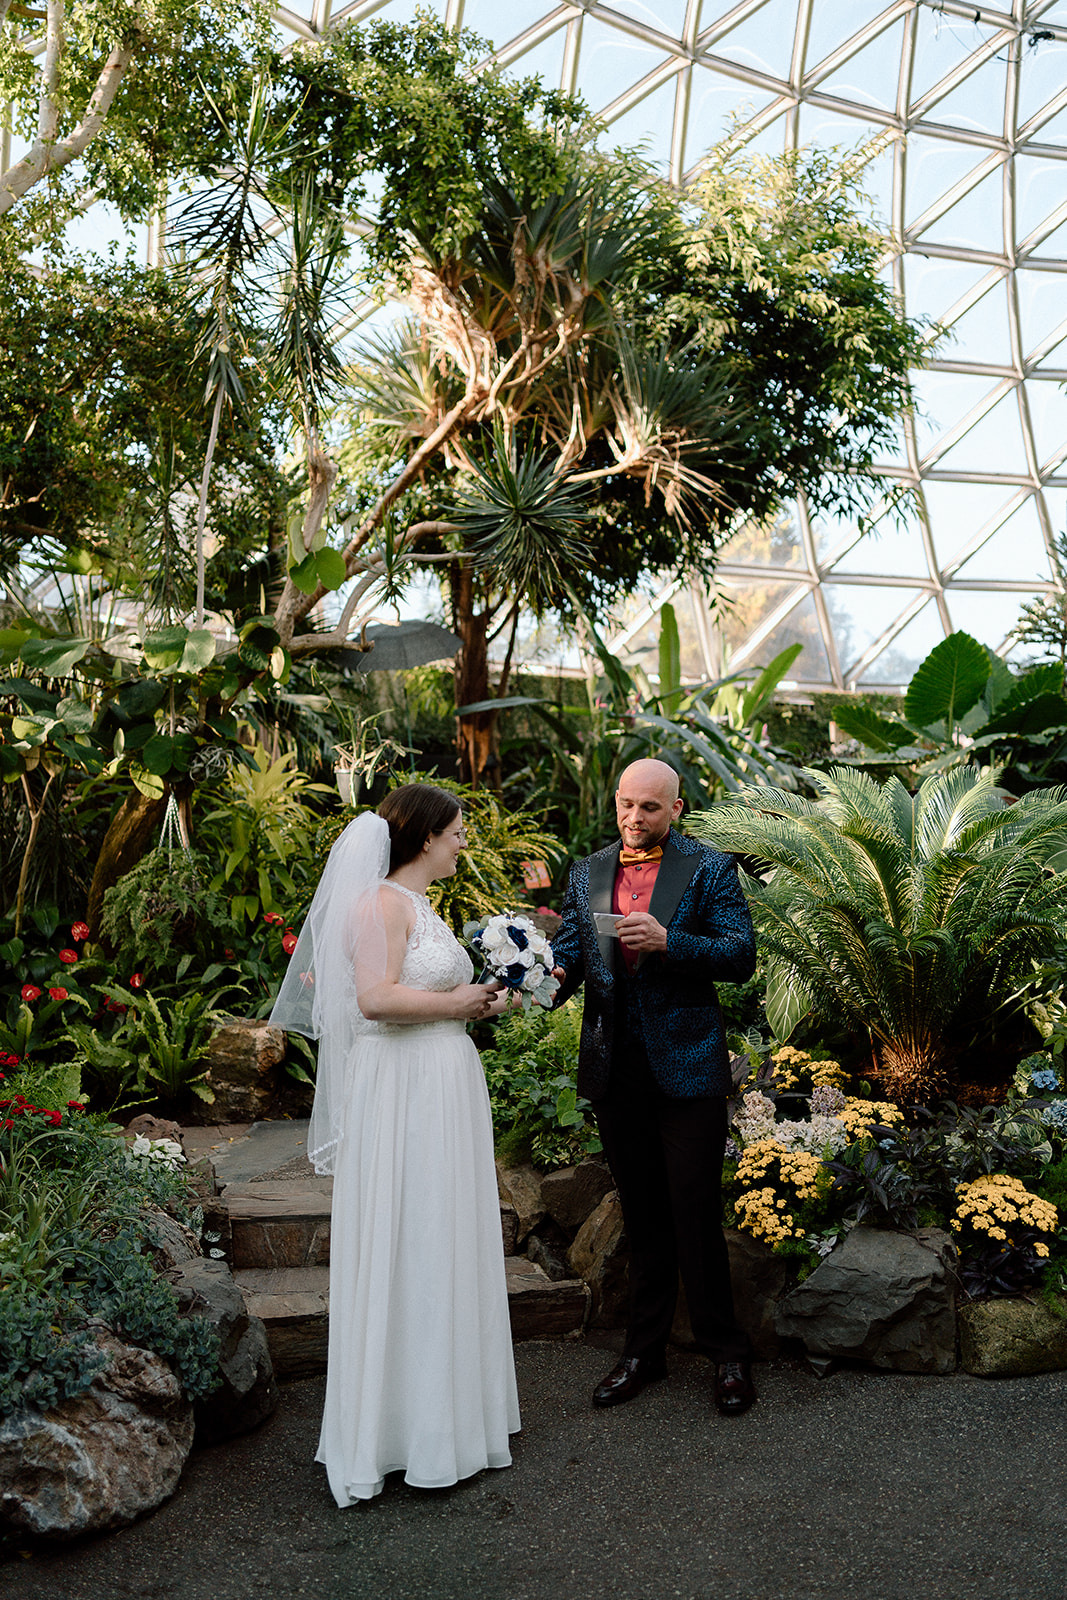 vow exchange at vancouver wedding ceremony with young hip and married wedding officiants